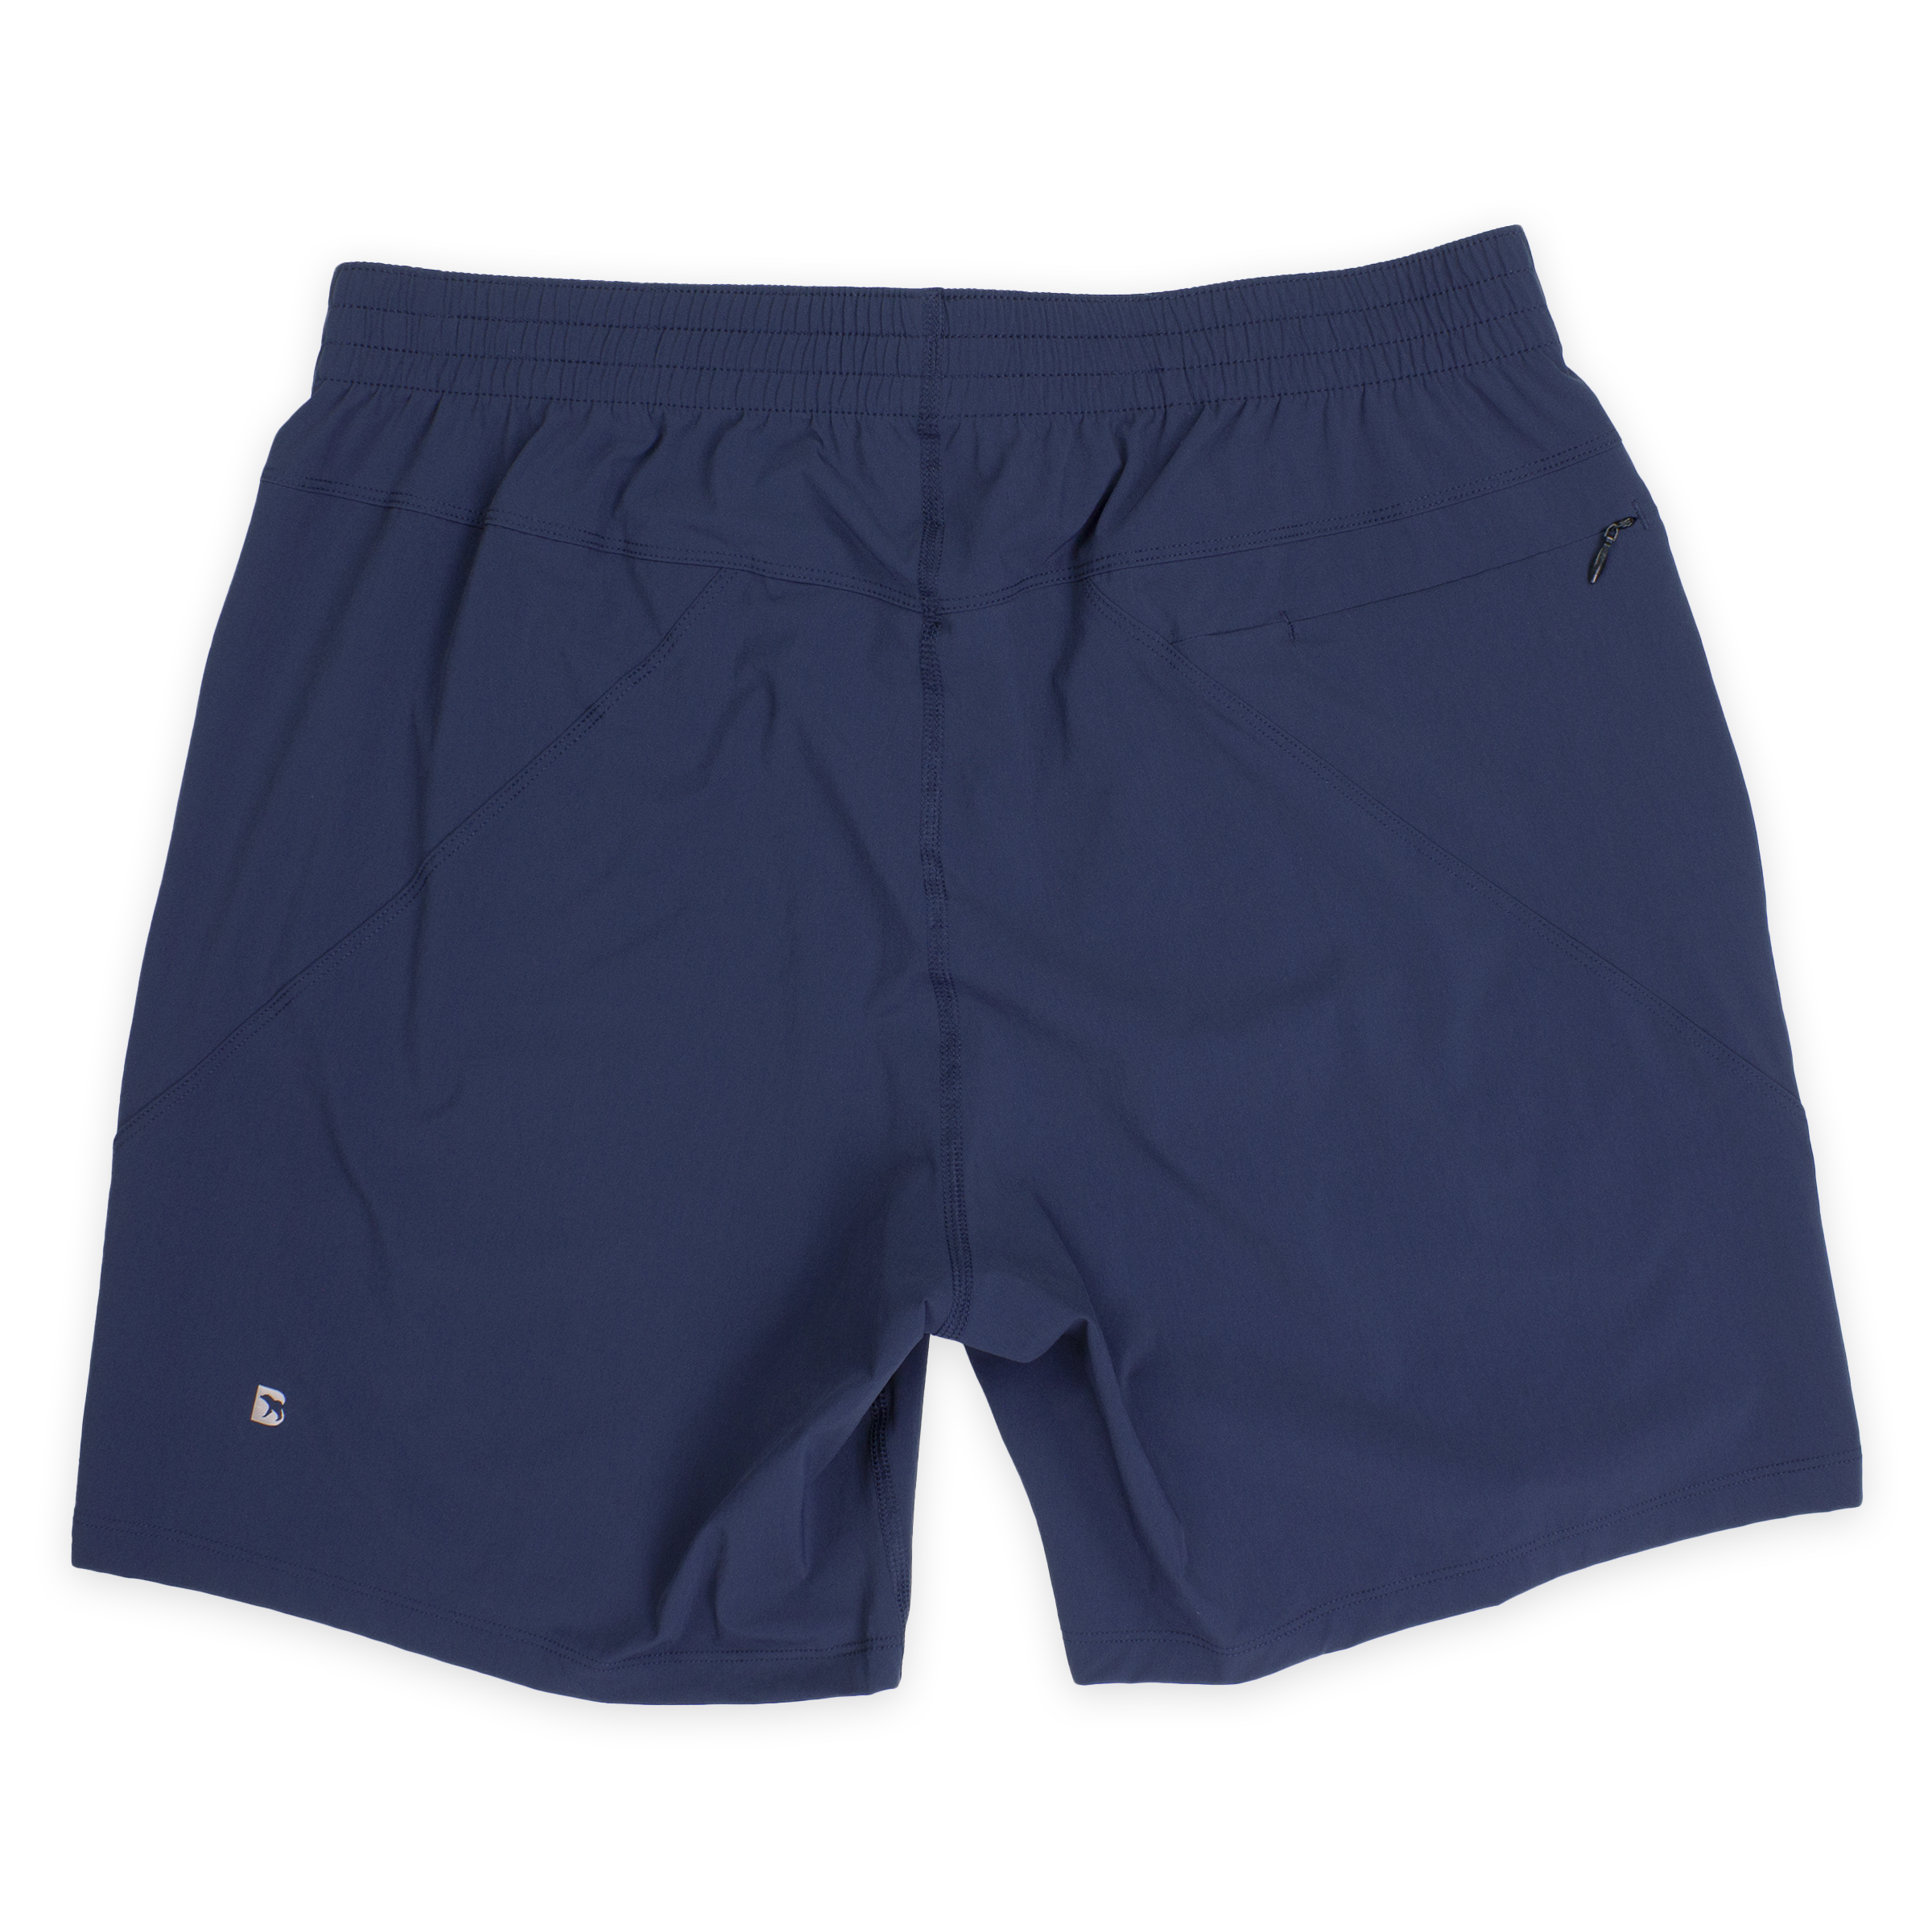 Atlas Short 7" Navy Back with elastic waistband, back right zippered pocket, and small reflective logo of Bear drawn inside the letter B in bottom left corner